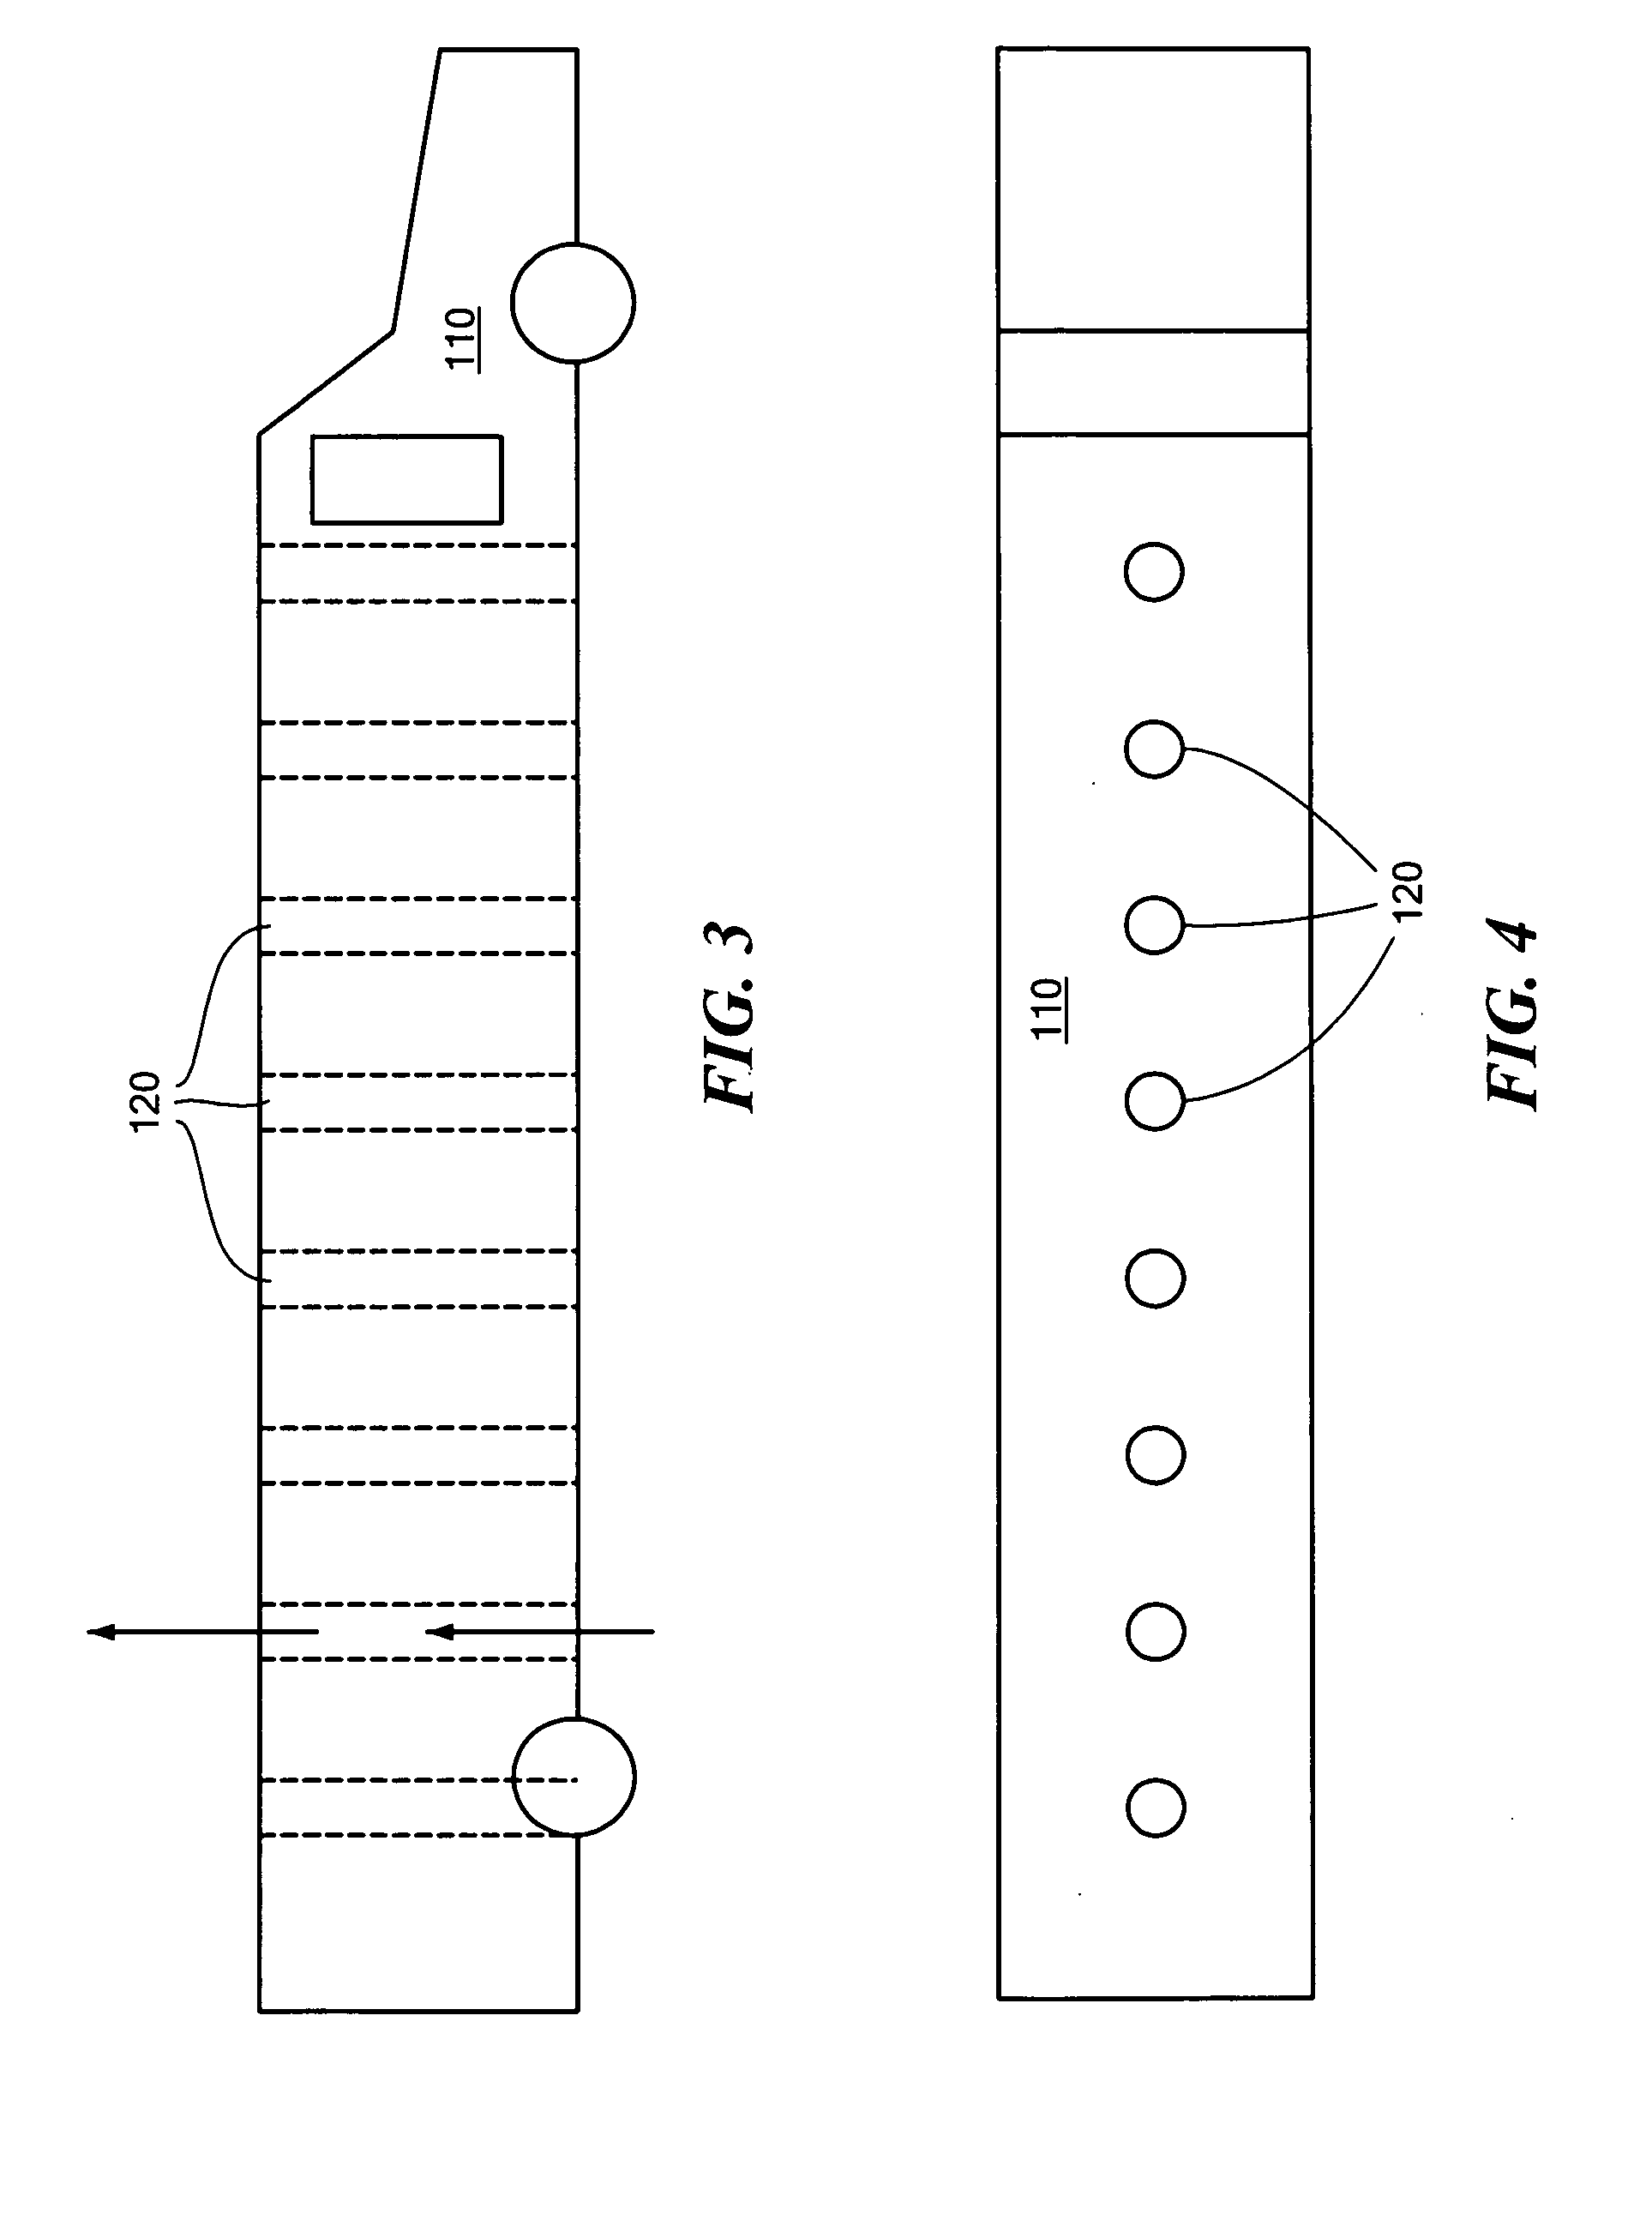 Vehicle with structural vent channels for blast energy and debris dissipation